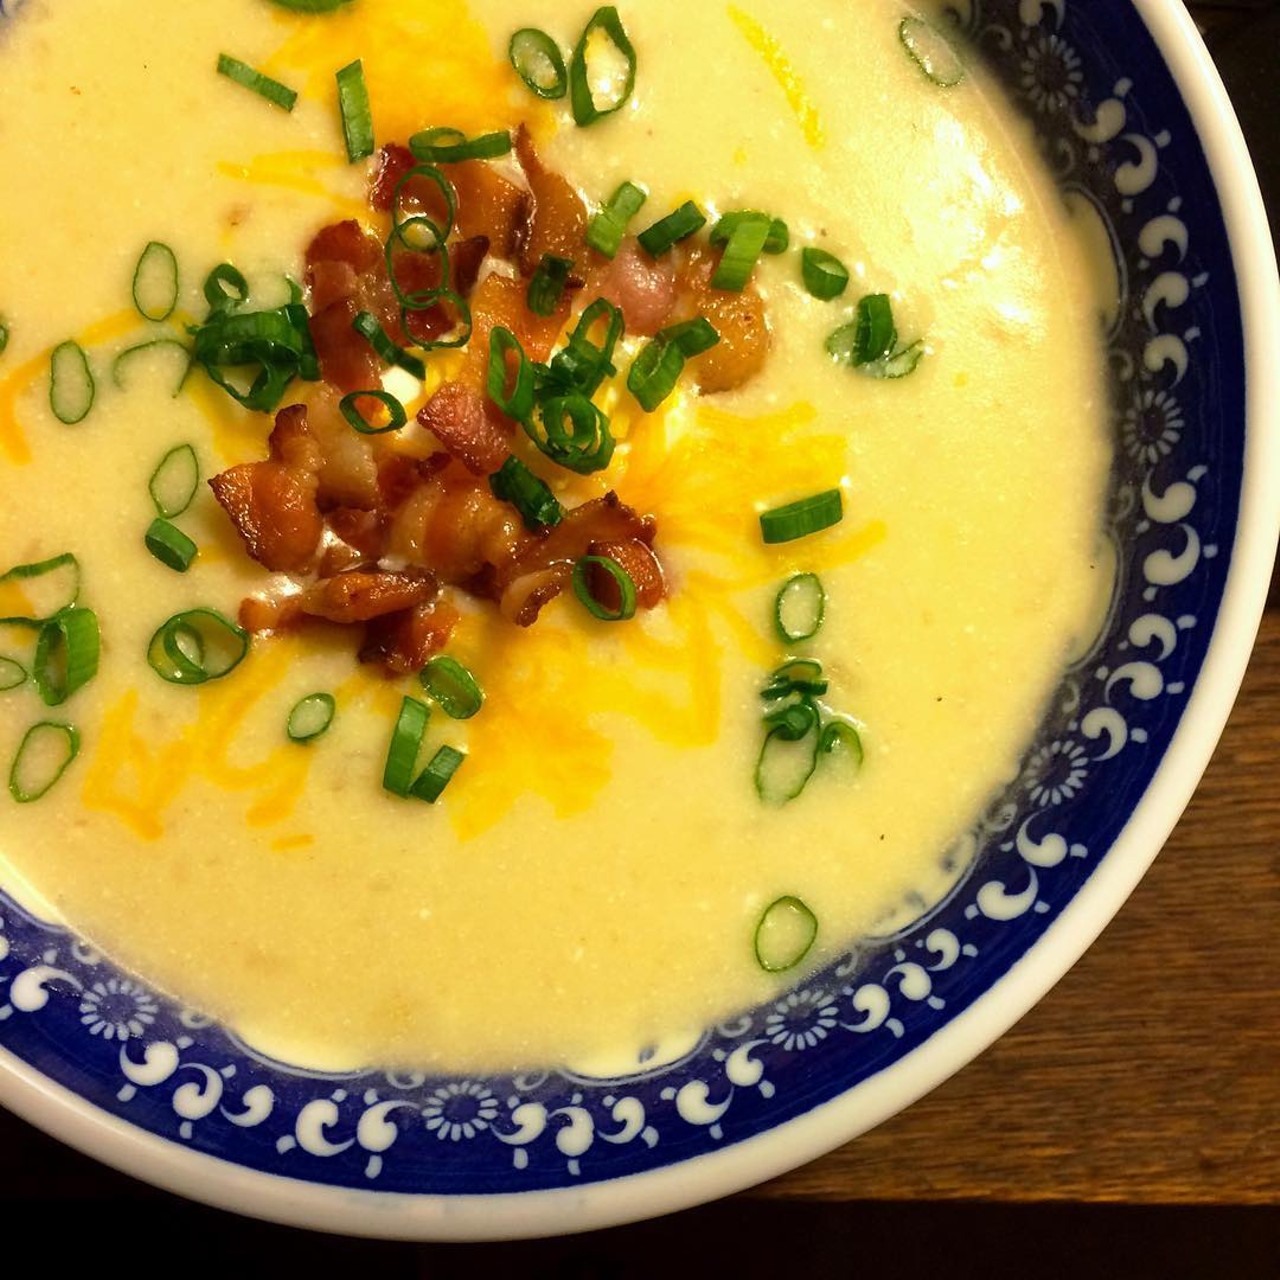 Baked Potato Soup, great way to warm up a cold Cleveland day #cookingincle